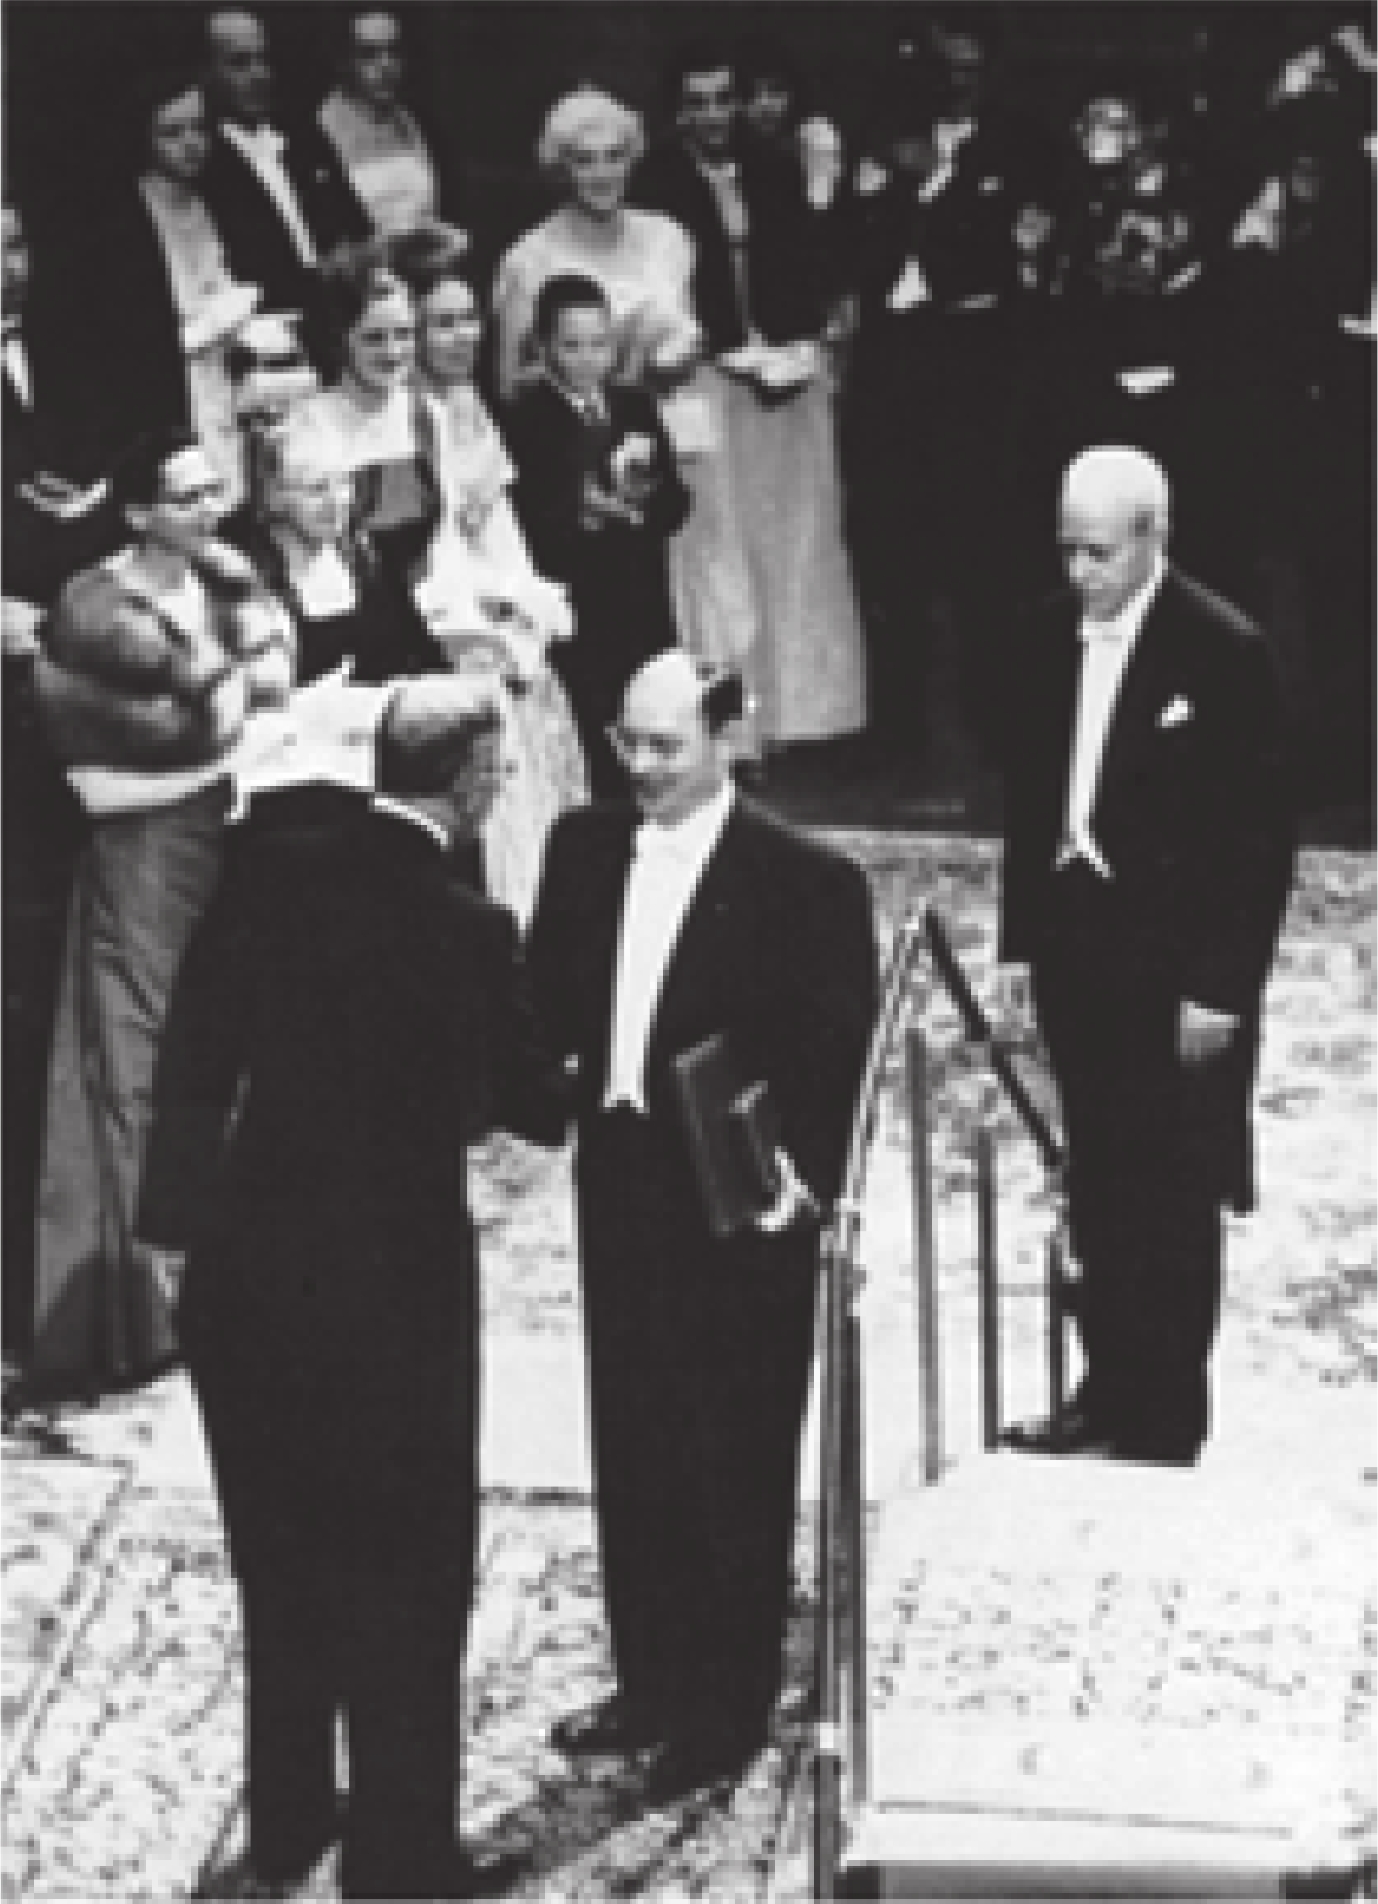 John Bardeen receiving Physics Nobel prize in 1956. Reprinted from Ref. [3].